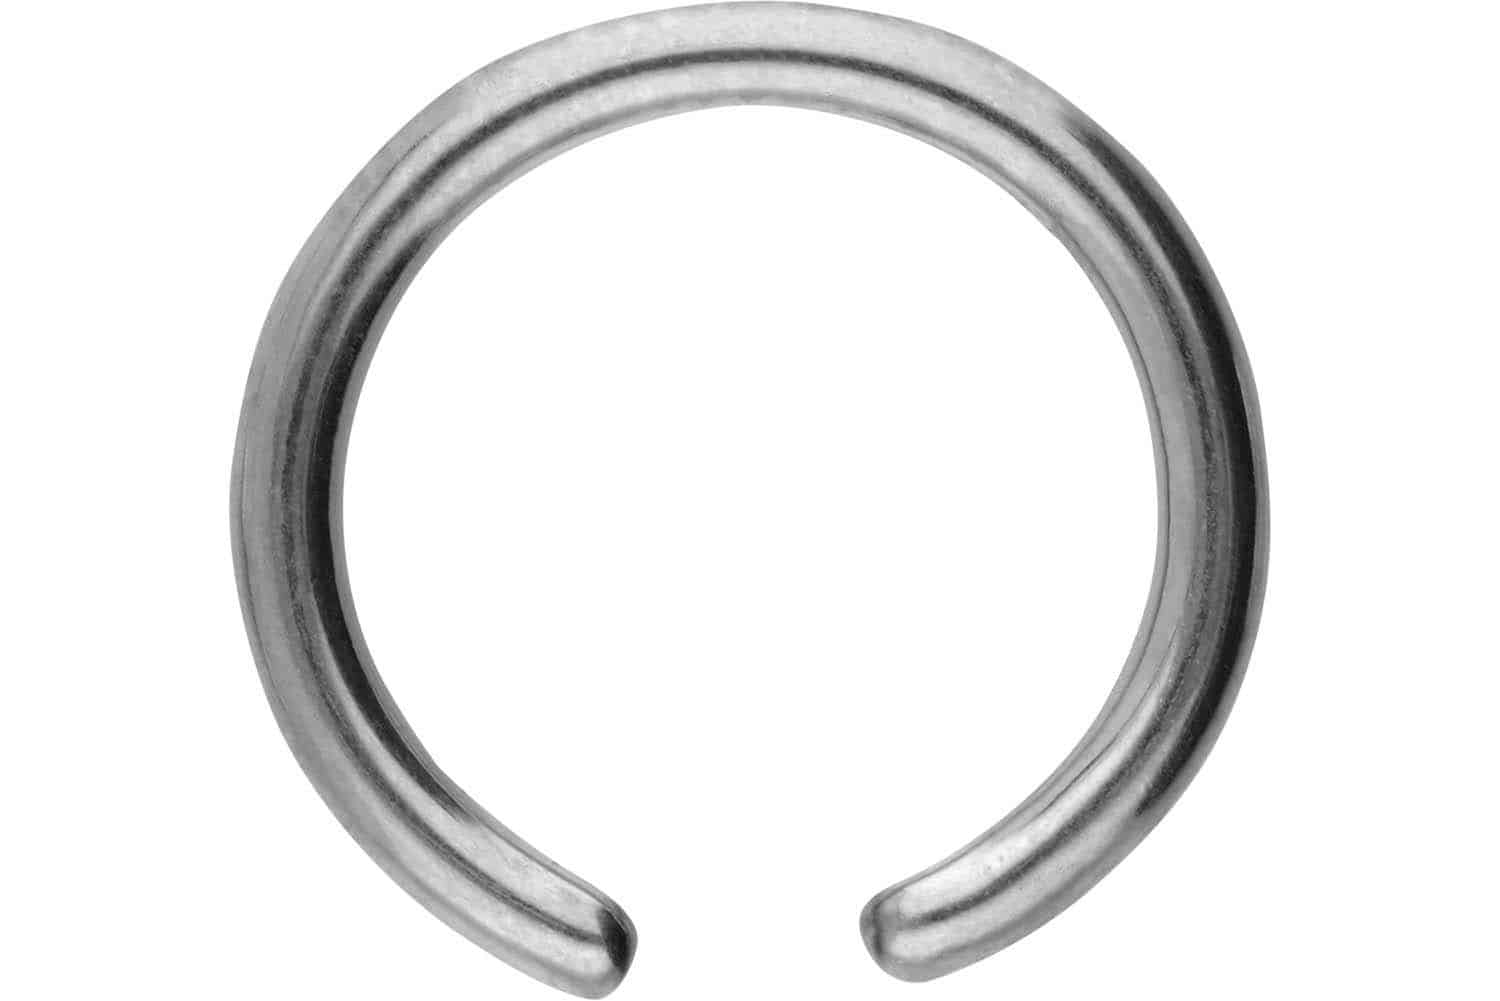 Surgical steel ball closure ring without ball